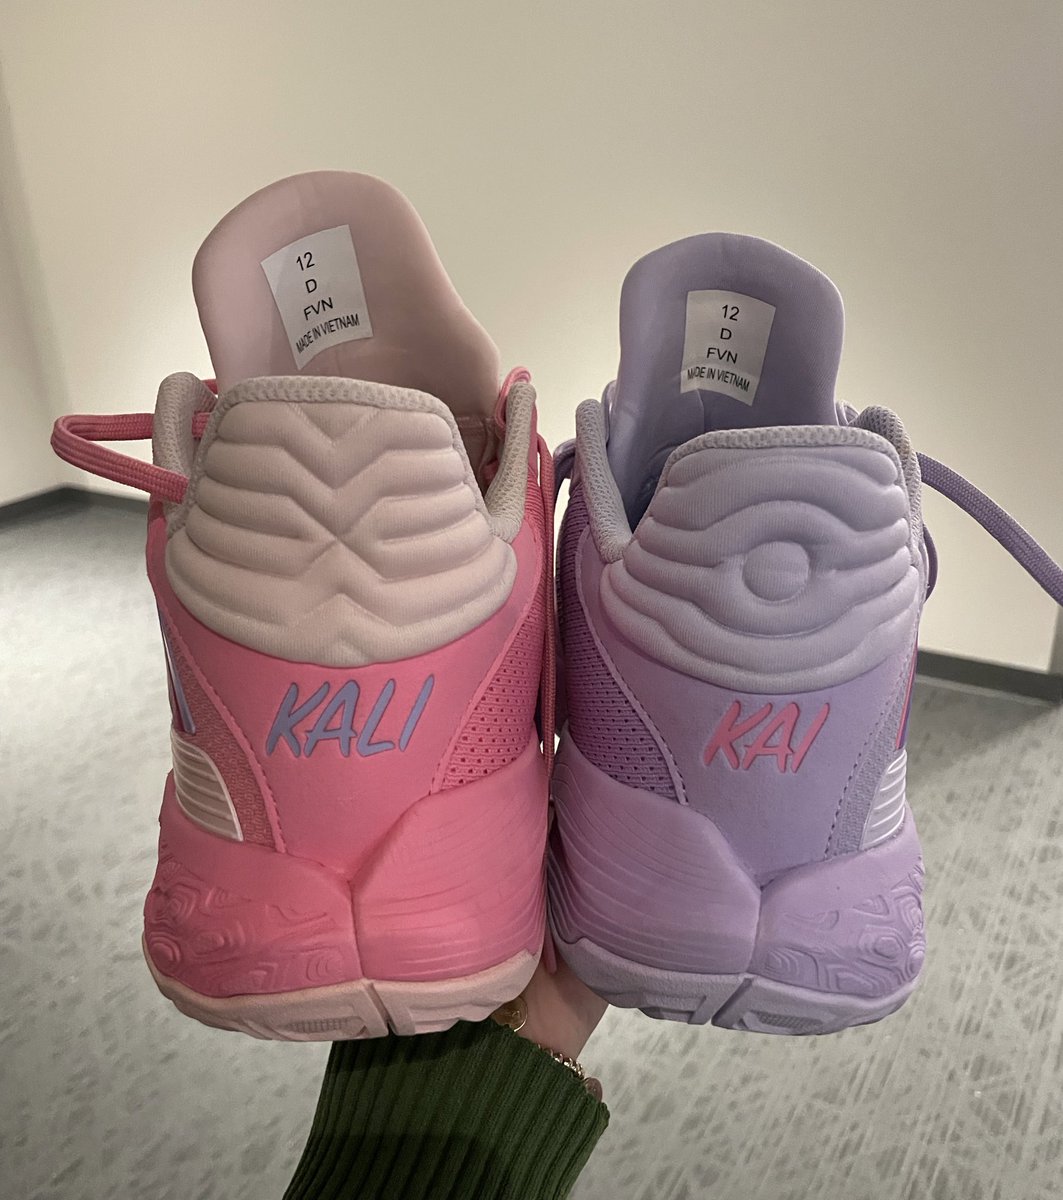 .@TyreseMaxey is wearing a special pair of @newbalancehoops sneakers tonight. Today is his twin nieces’ birthday. Their names are Kali and Kai, and their favorite colors are pink and purple. 🩷💜